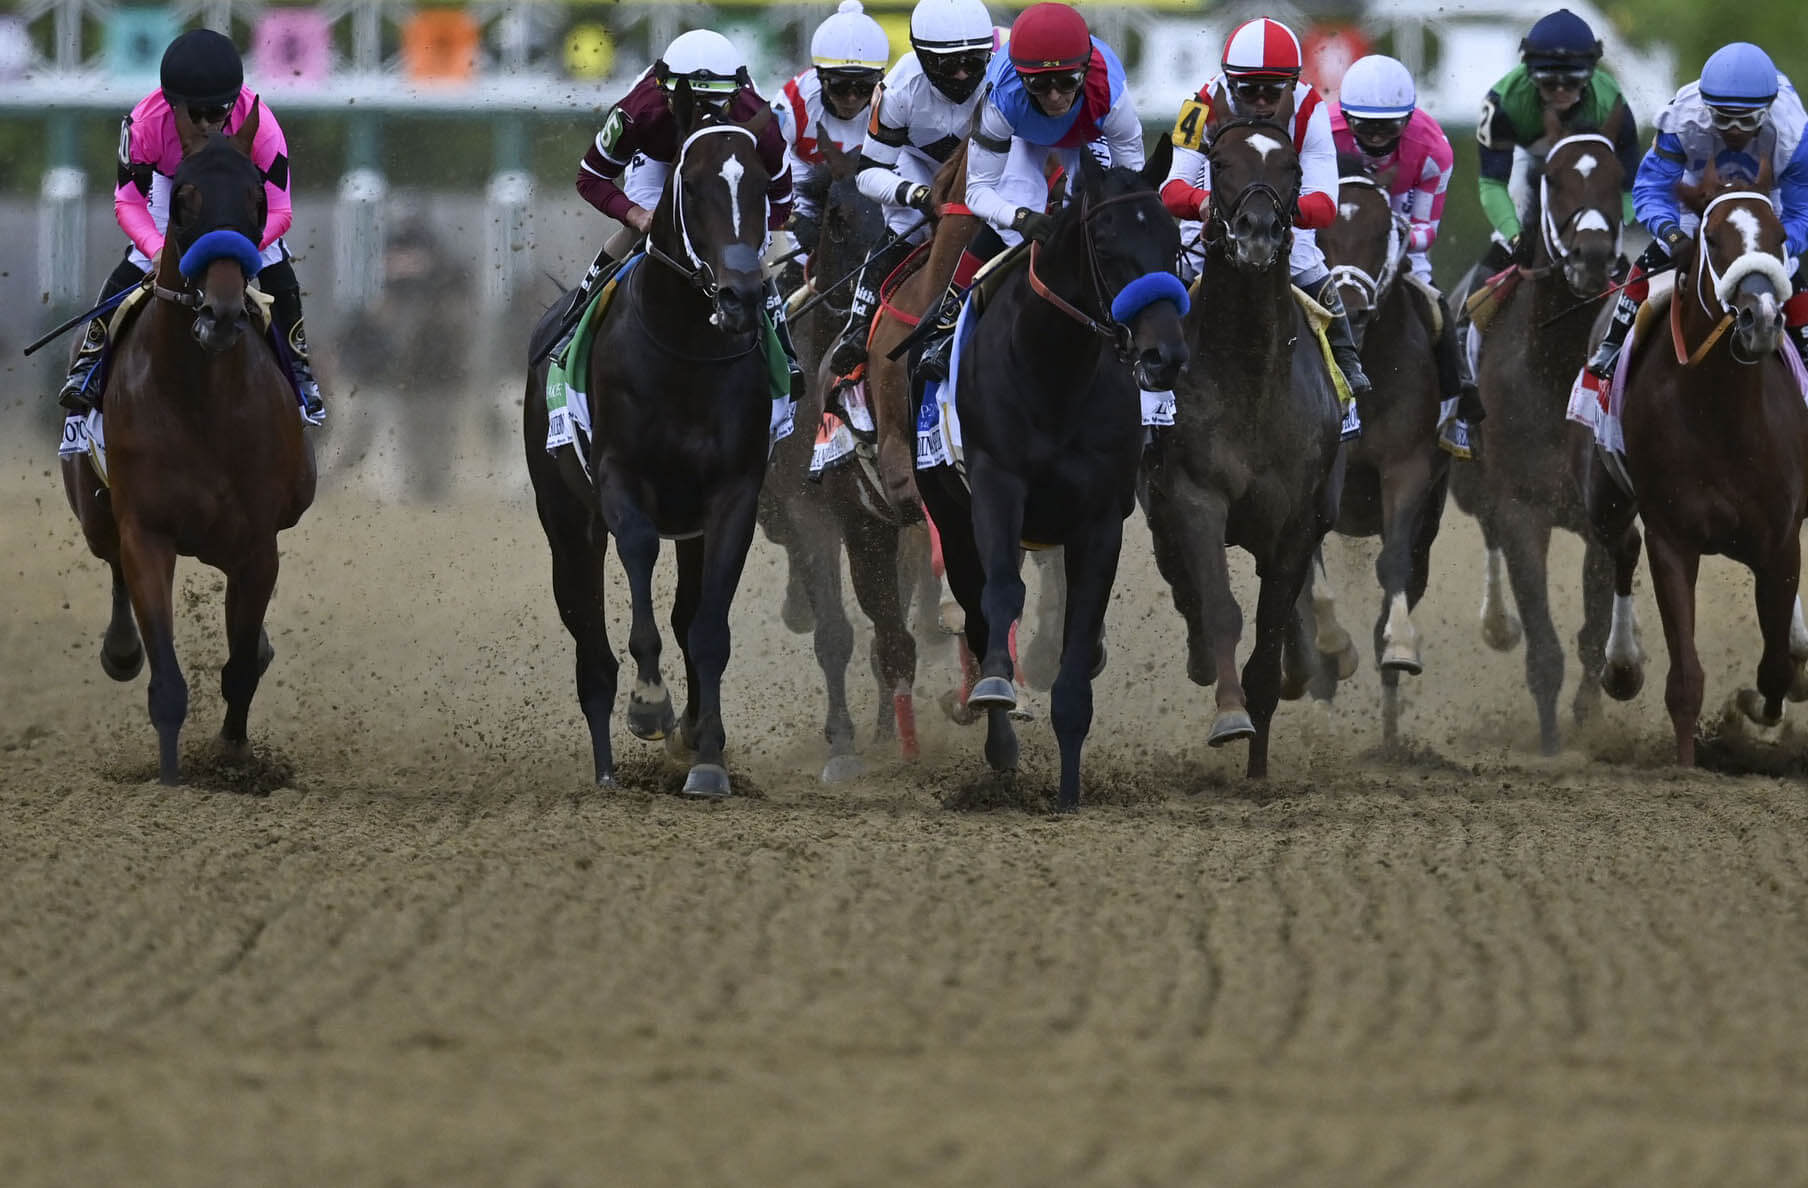 Preakness Stakes Post Positions Mage Draws Gate 3 for Preakness